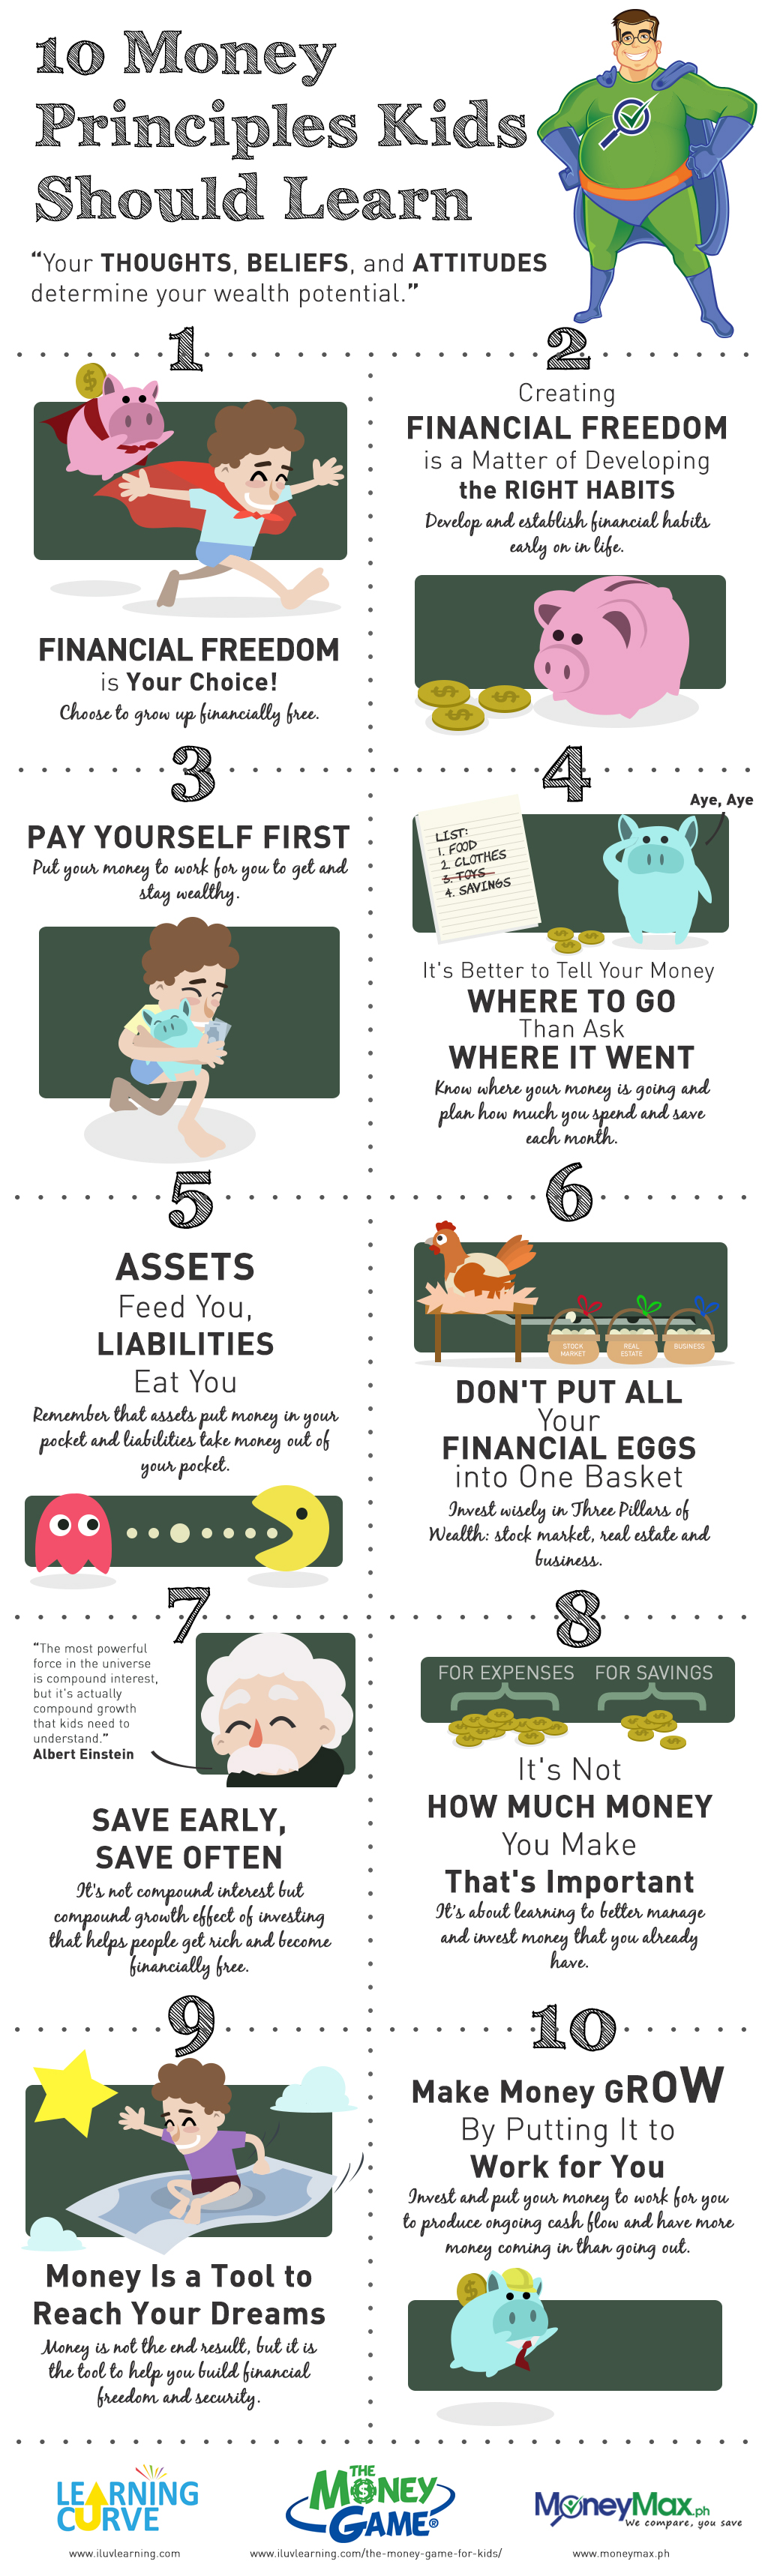 10 Money Principles Kids Should Learn Infographic